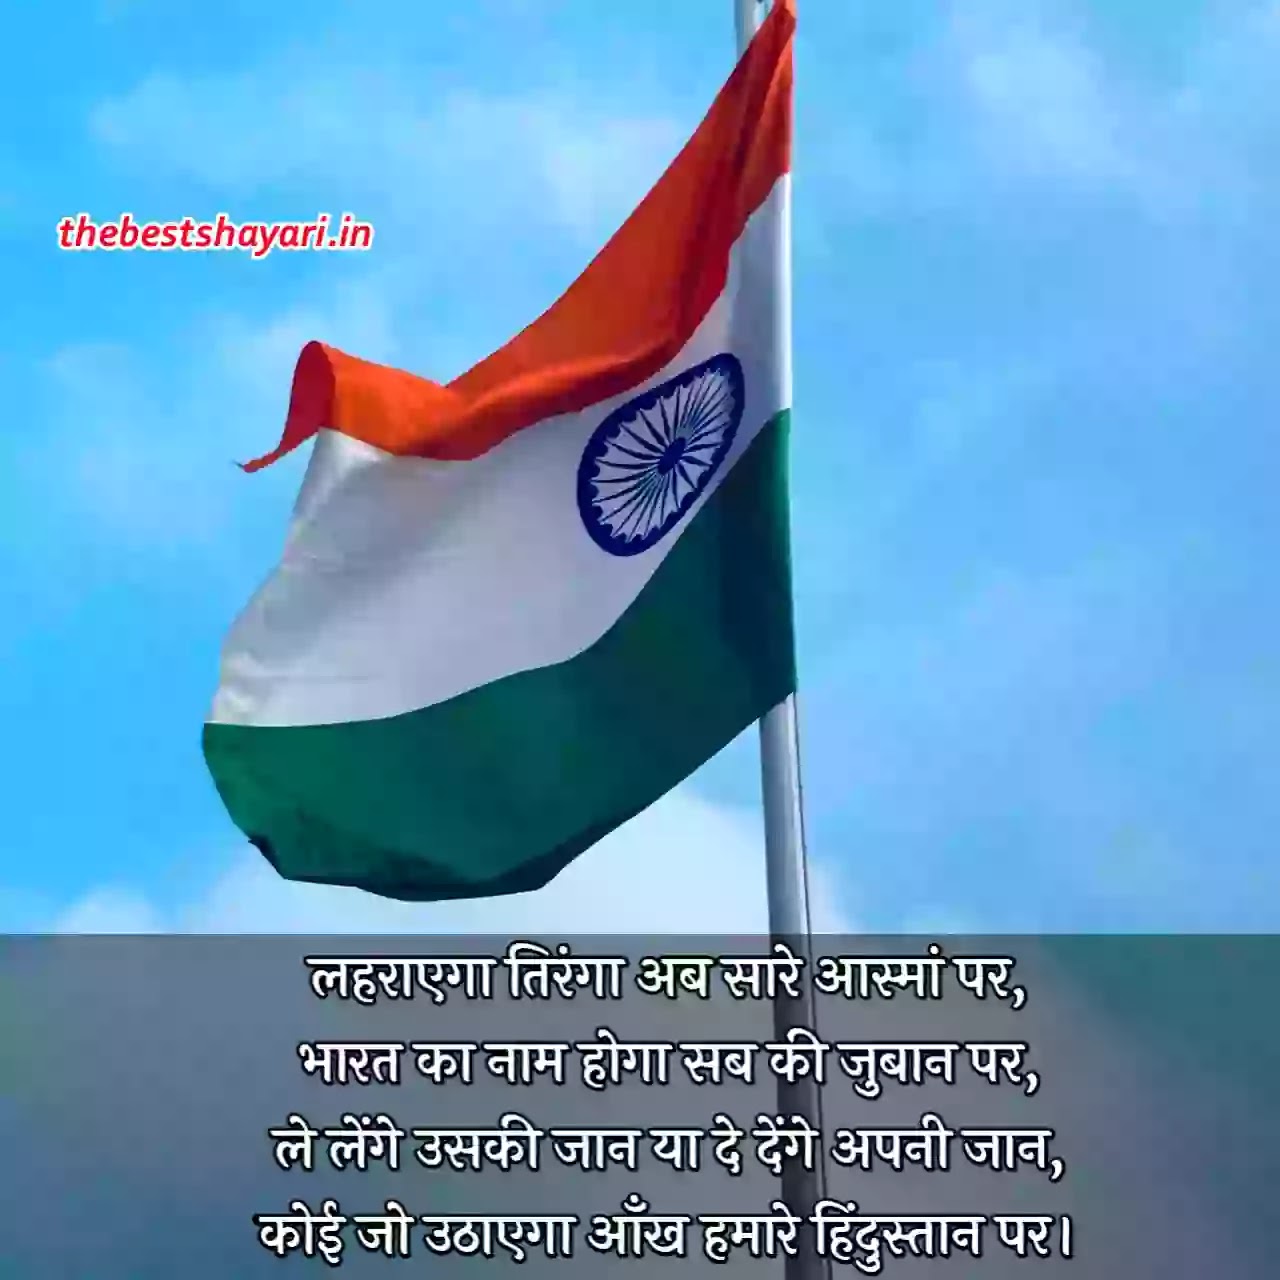 Republic Day motivational quotes